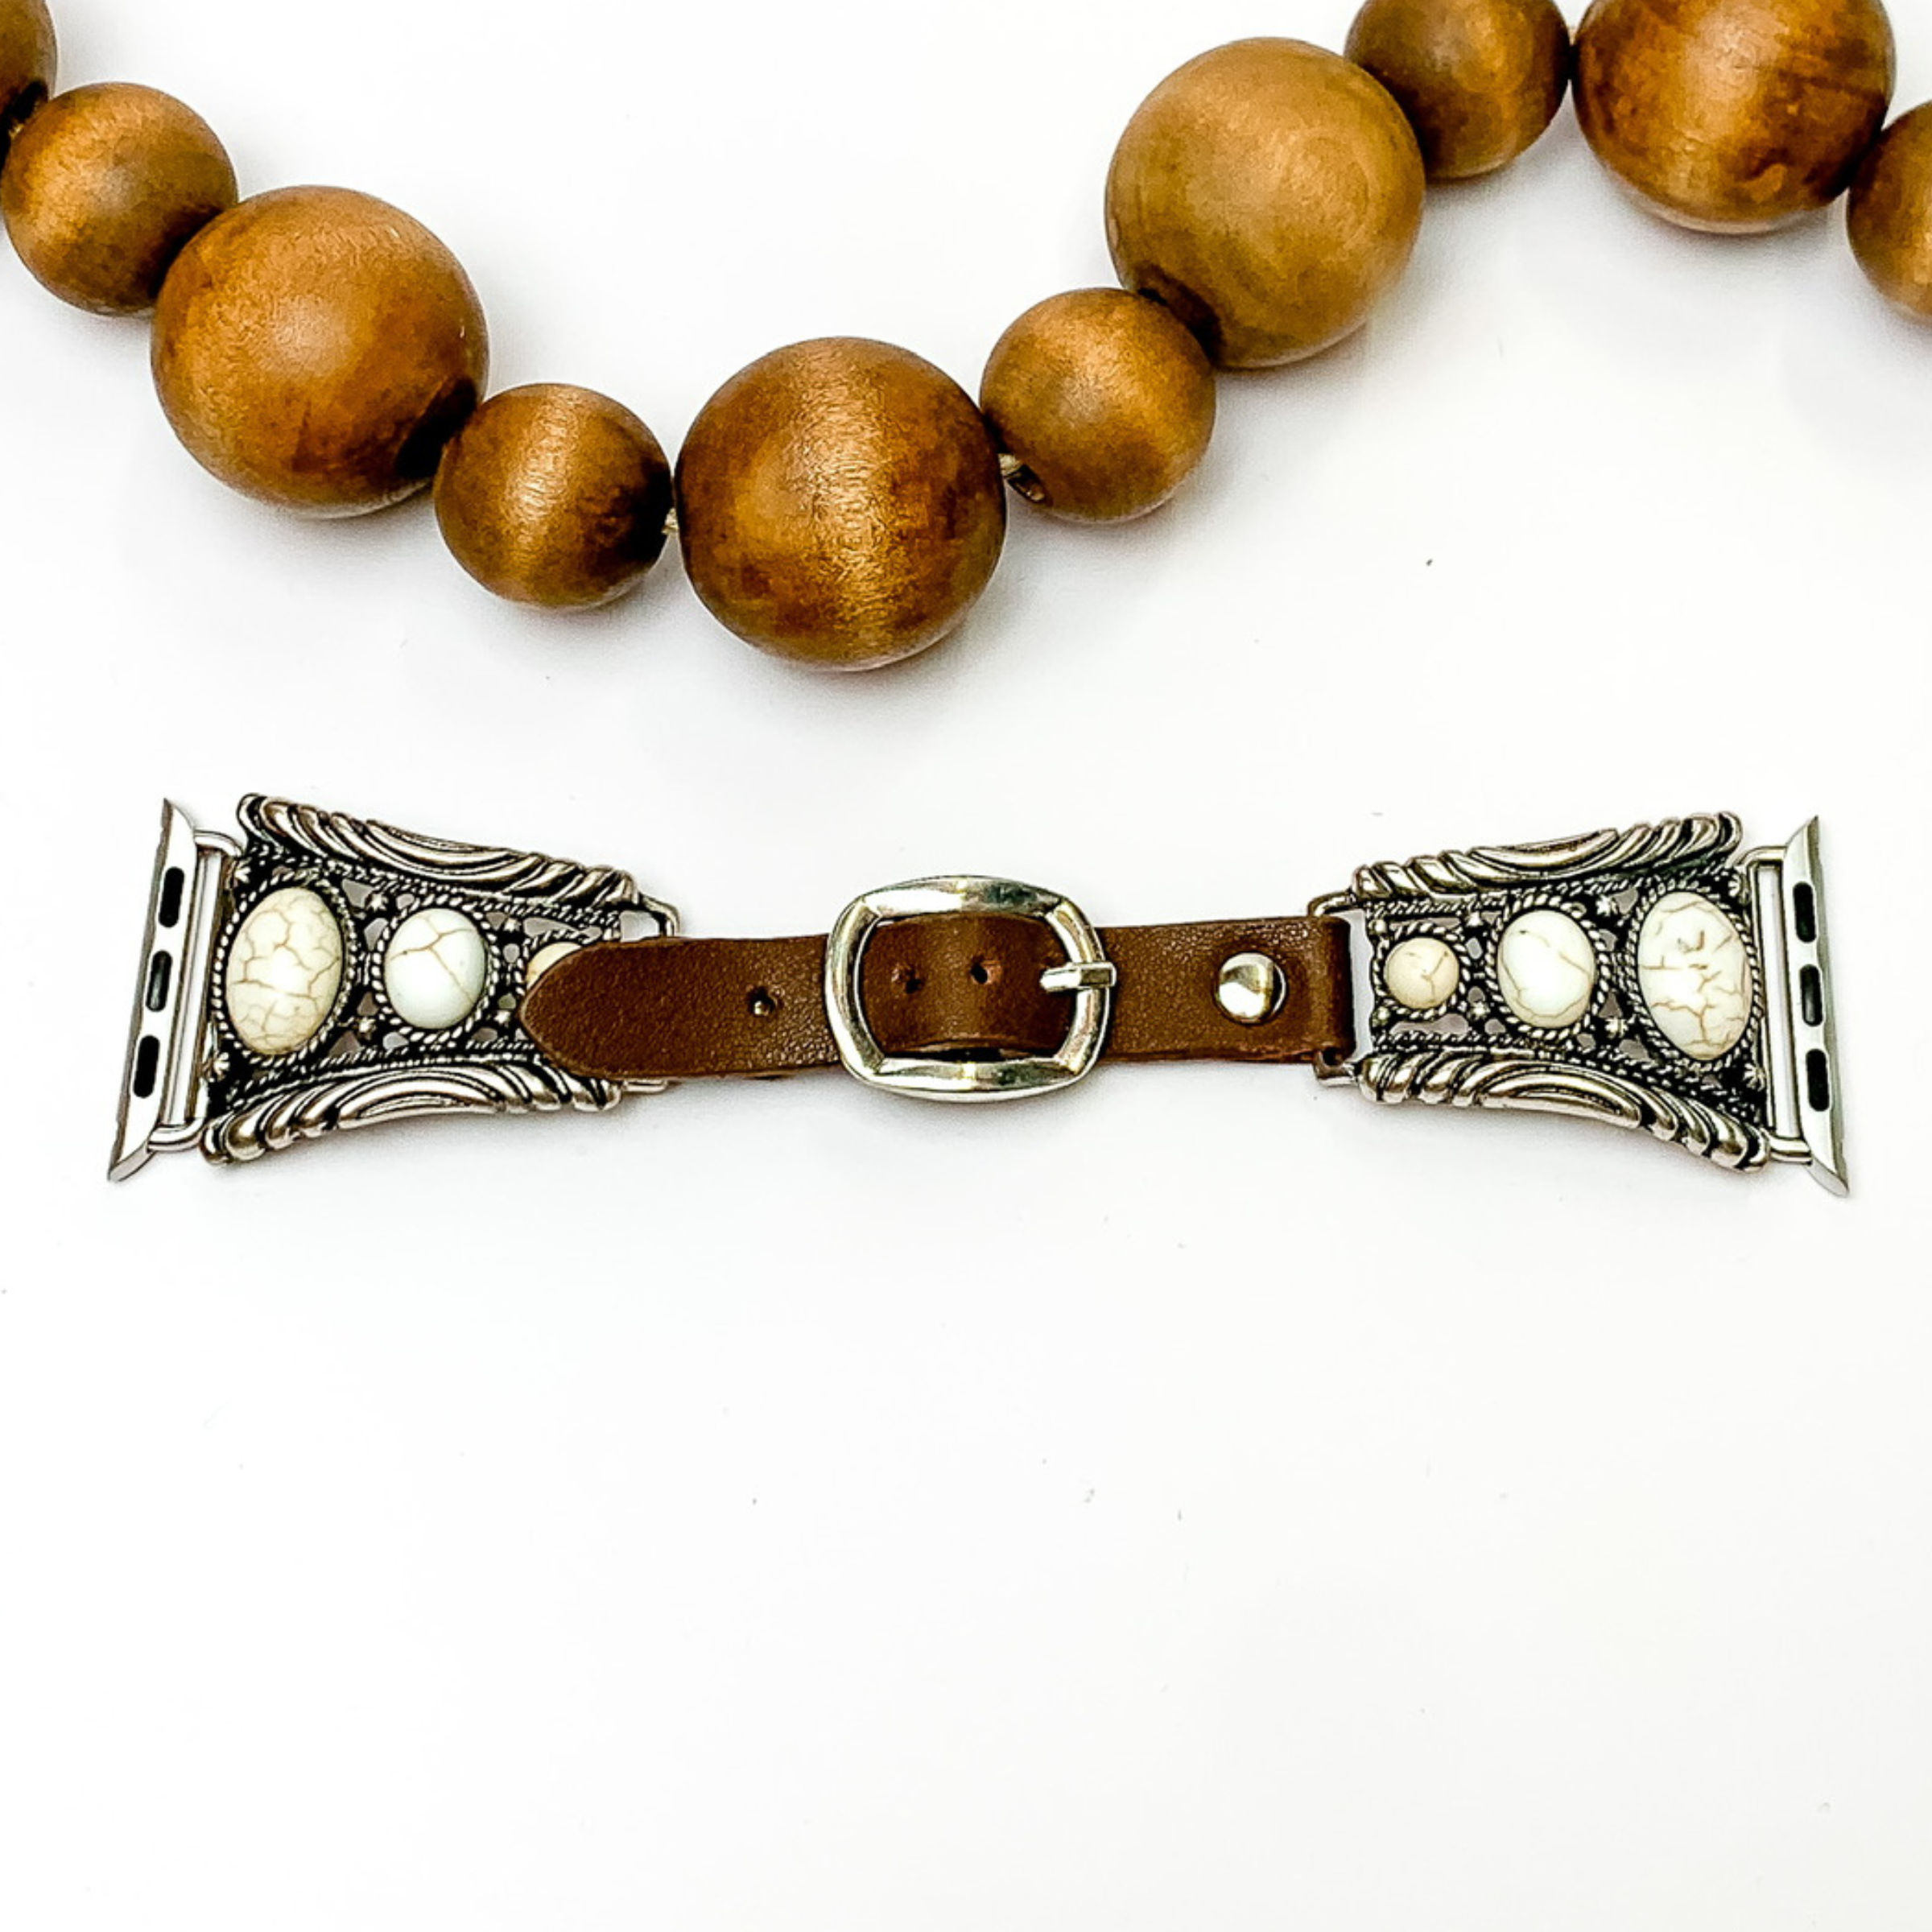 Dark Brown watch band with silver, trapesoid shaped ends with Apple watch band acessories. The ends have three ivory stones each going from biggest to smallest. This watch band is pictured on a white background with brown beads above the band. 